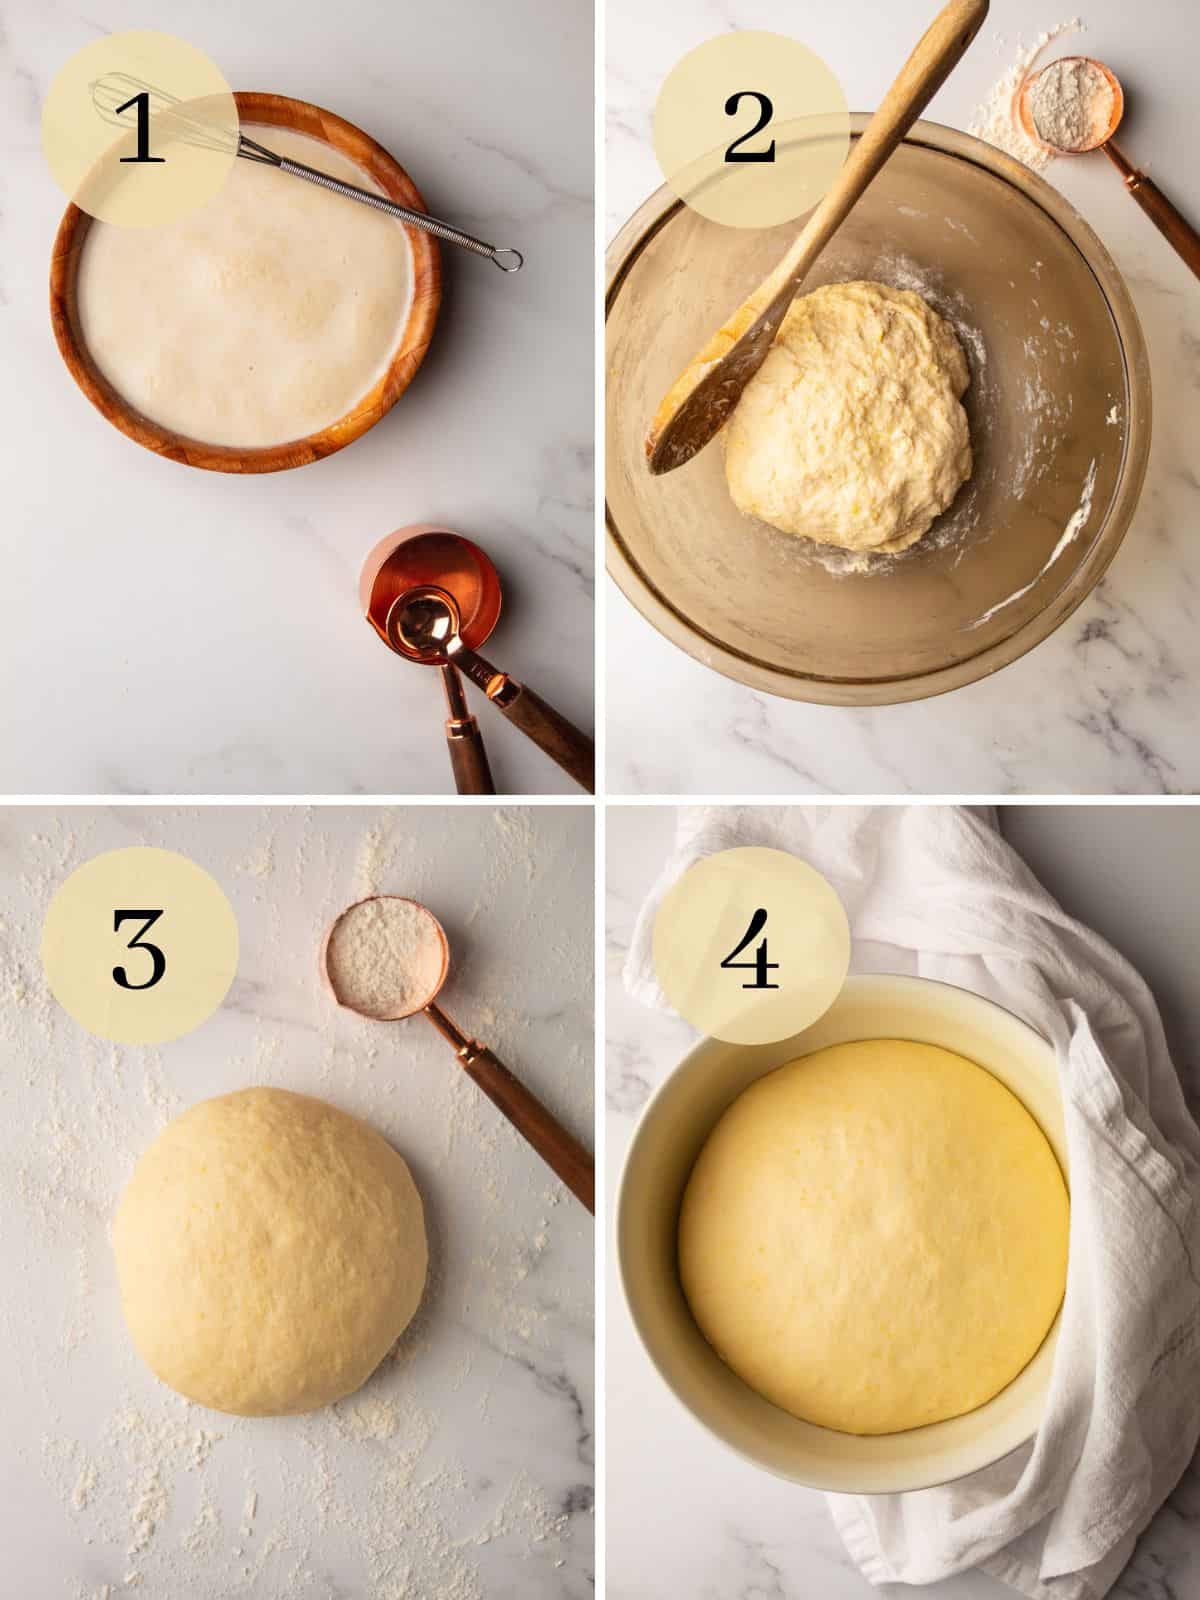 yeast mixture in bowl, mixed dough with spoon, kneaded dough, and risen dough in bowl.